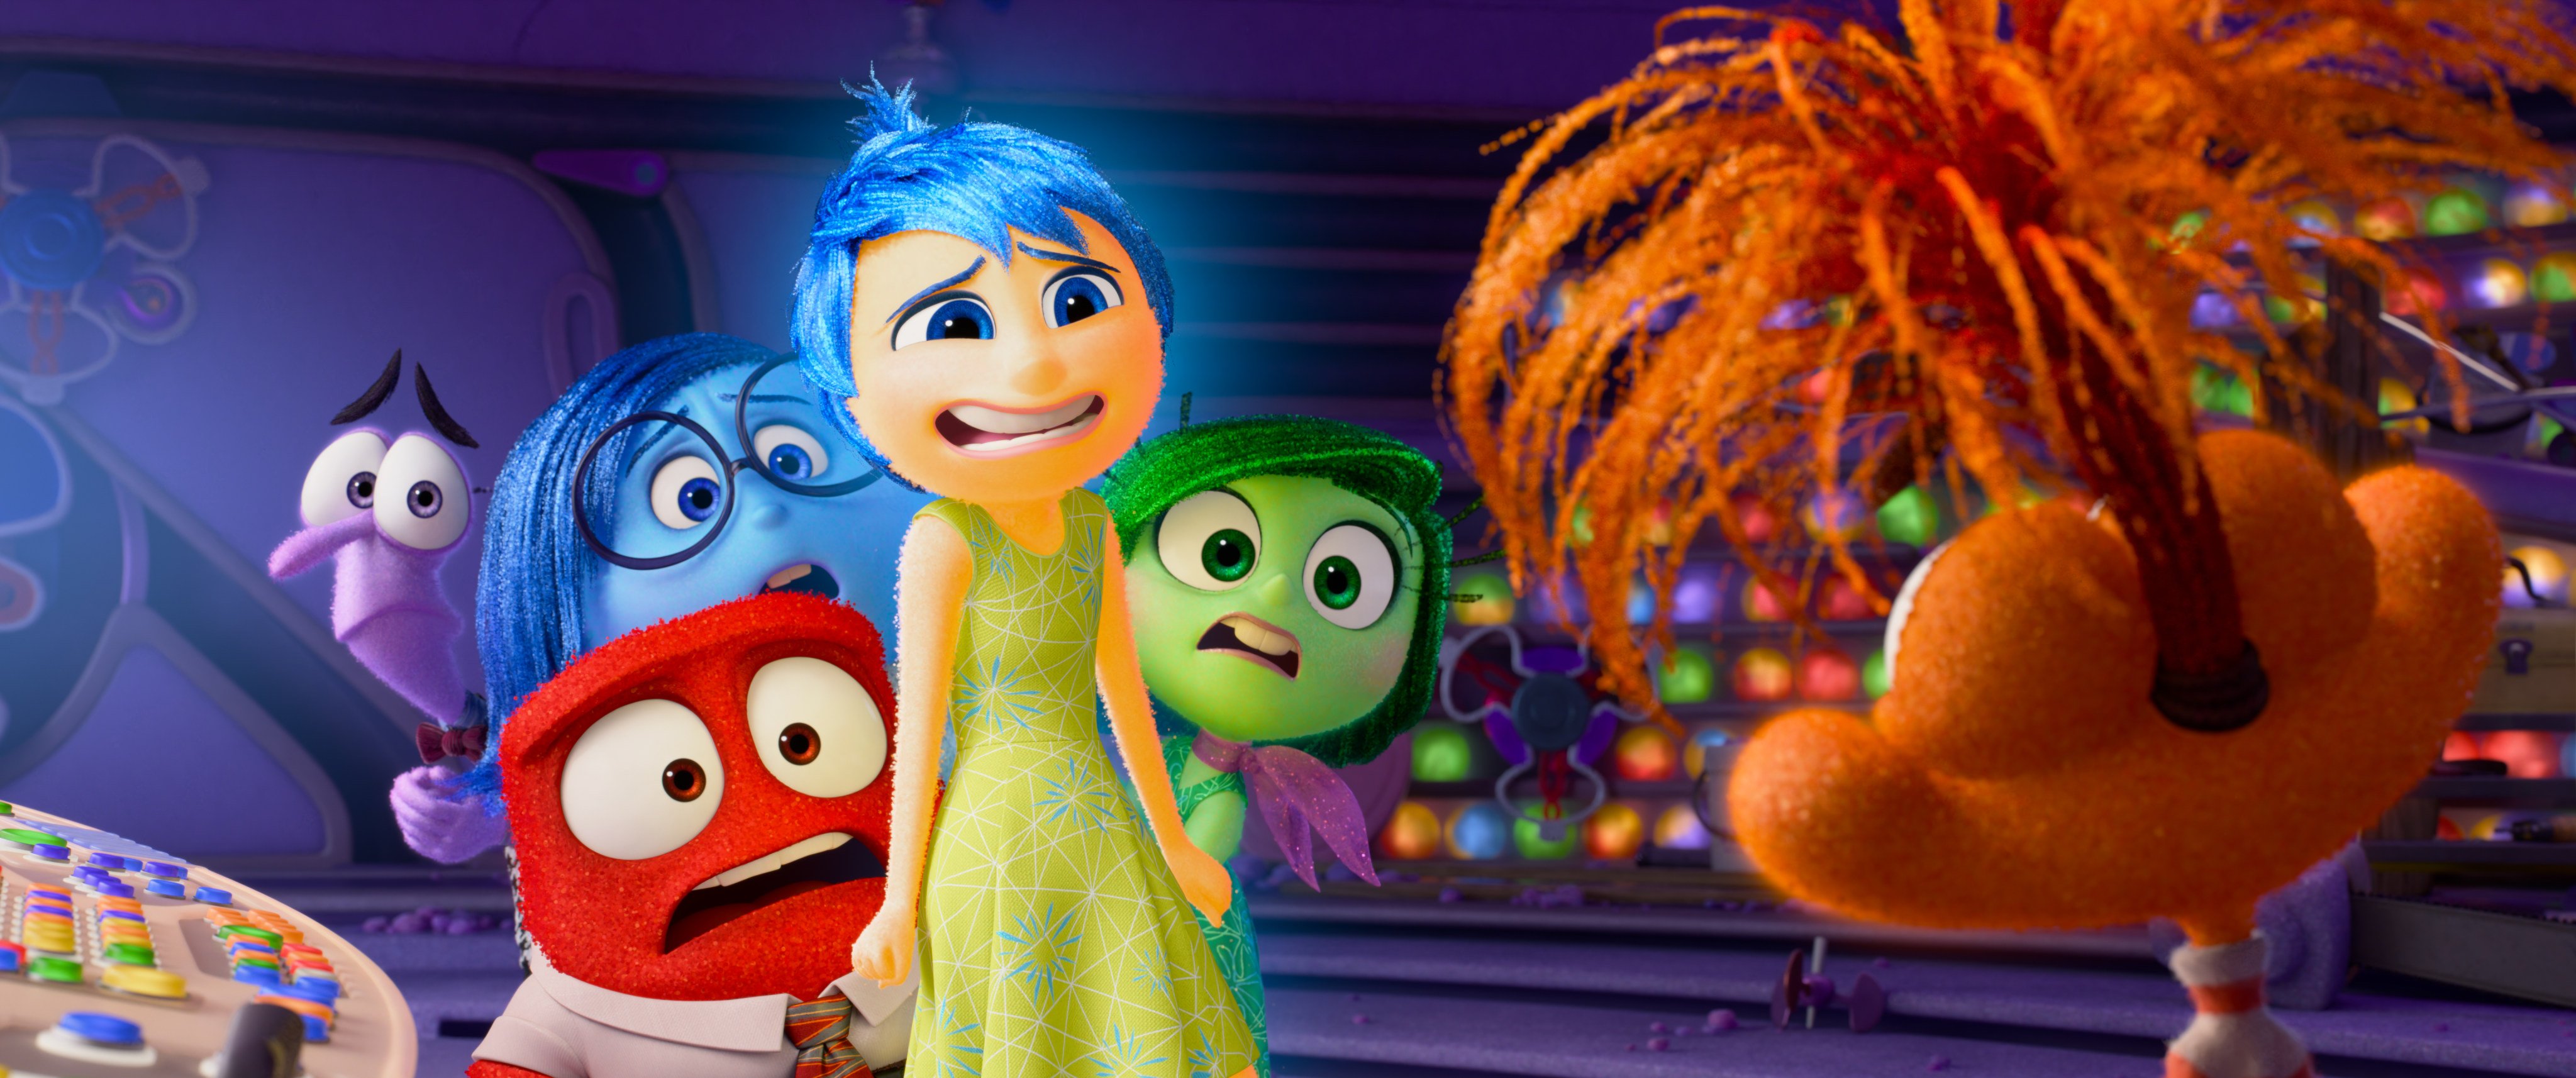 In Inside Out 2, Joy, Sadness, Anger, Fear and Disgust are not sure how to feel when Anxiety shows up. Photo: Pixar